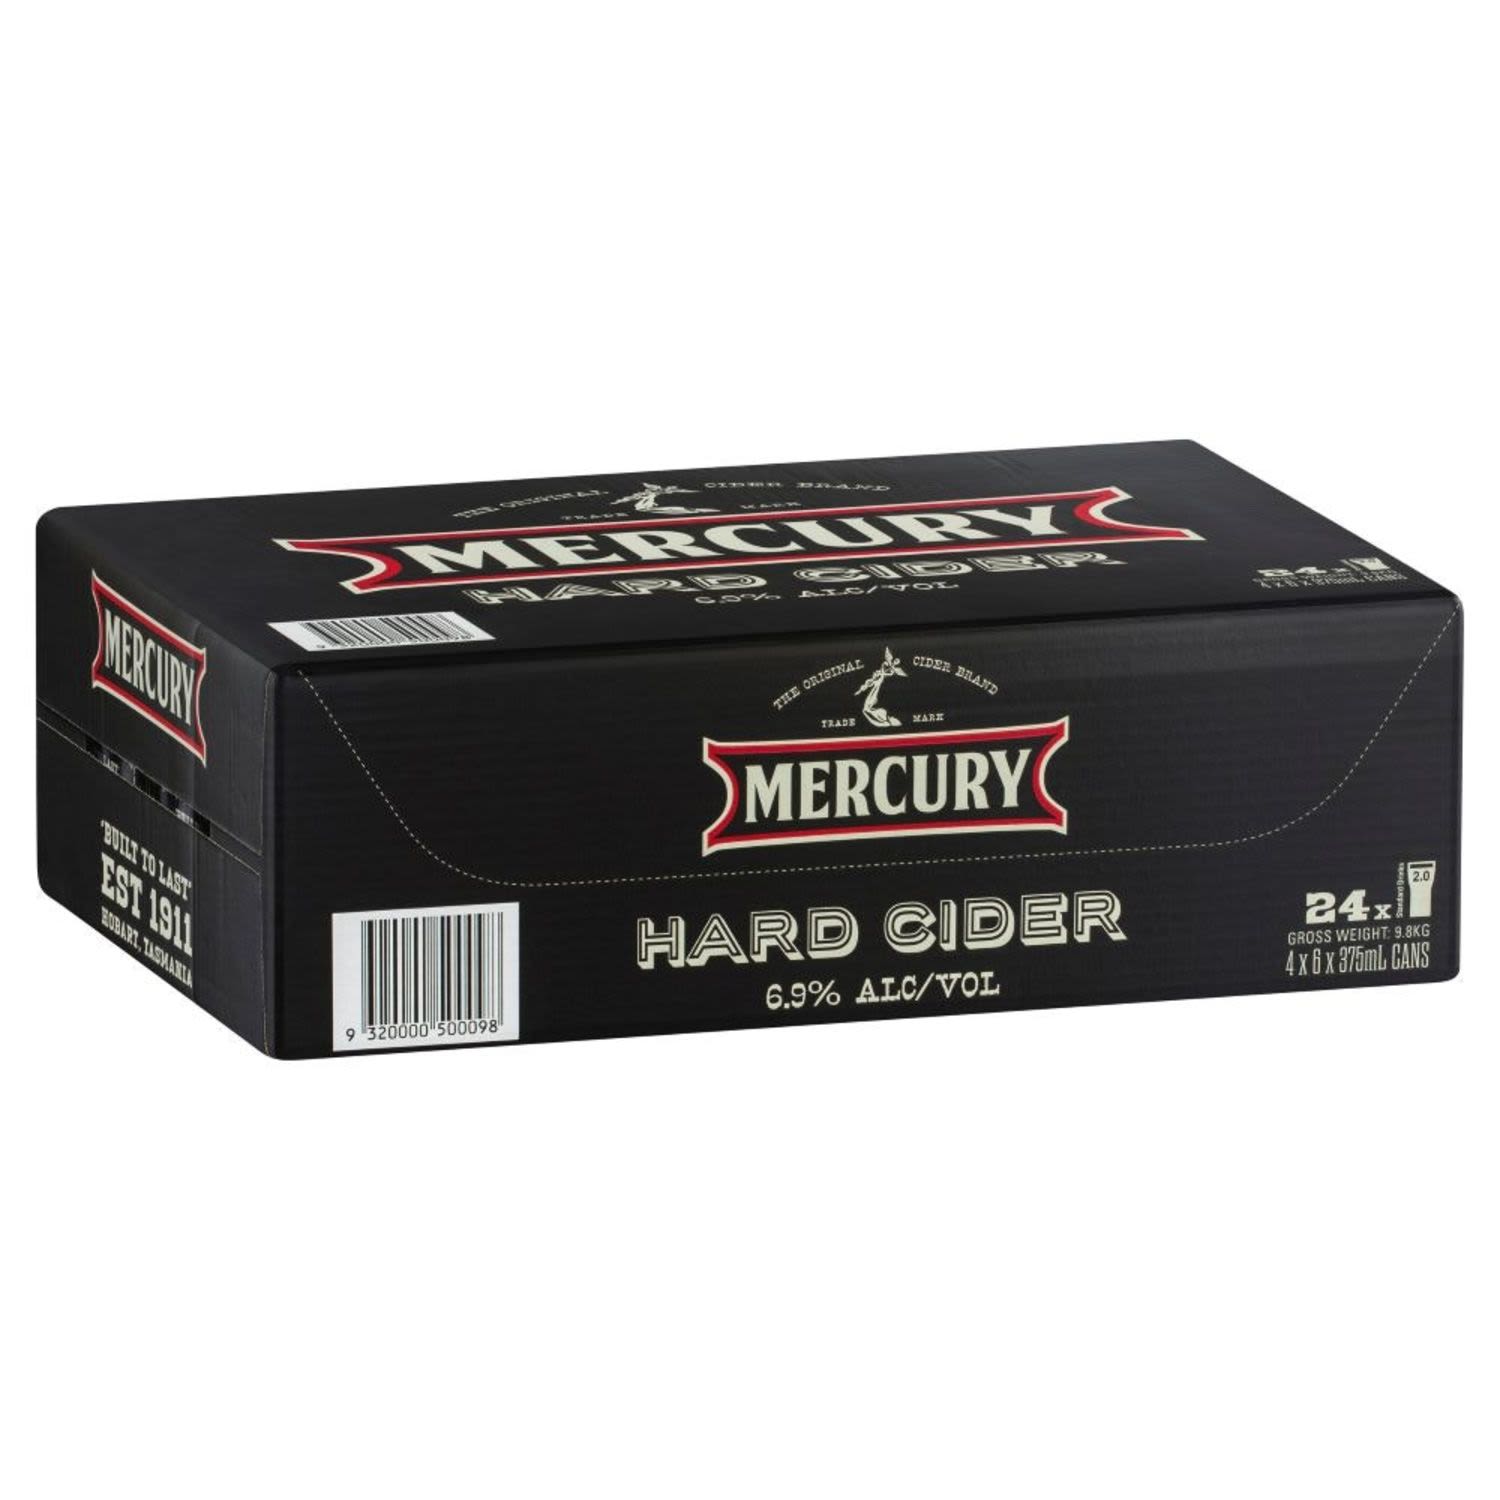 Mercury Hard Cider is inspired by traditional hard ciders. The higher alcohol gives a richer, fuller flavoured taste while still retaining a smooth, crisp finish.<br /> <br />Alcohol Volume: 6.90%<br /><br />Pack Format: 24 Pack<br /><br />Standard Drinks: 2</br /><br />Pack Type: Can<br /><br />Country of Origin: Australia<br />